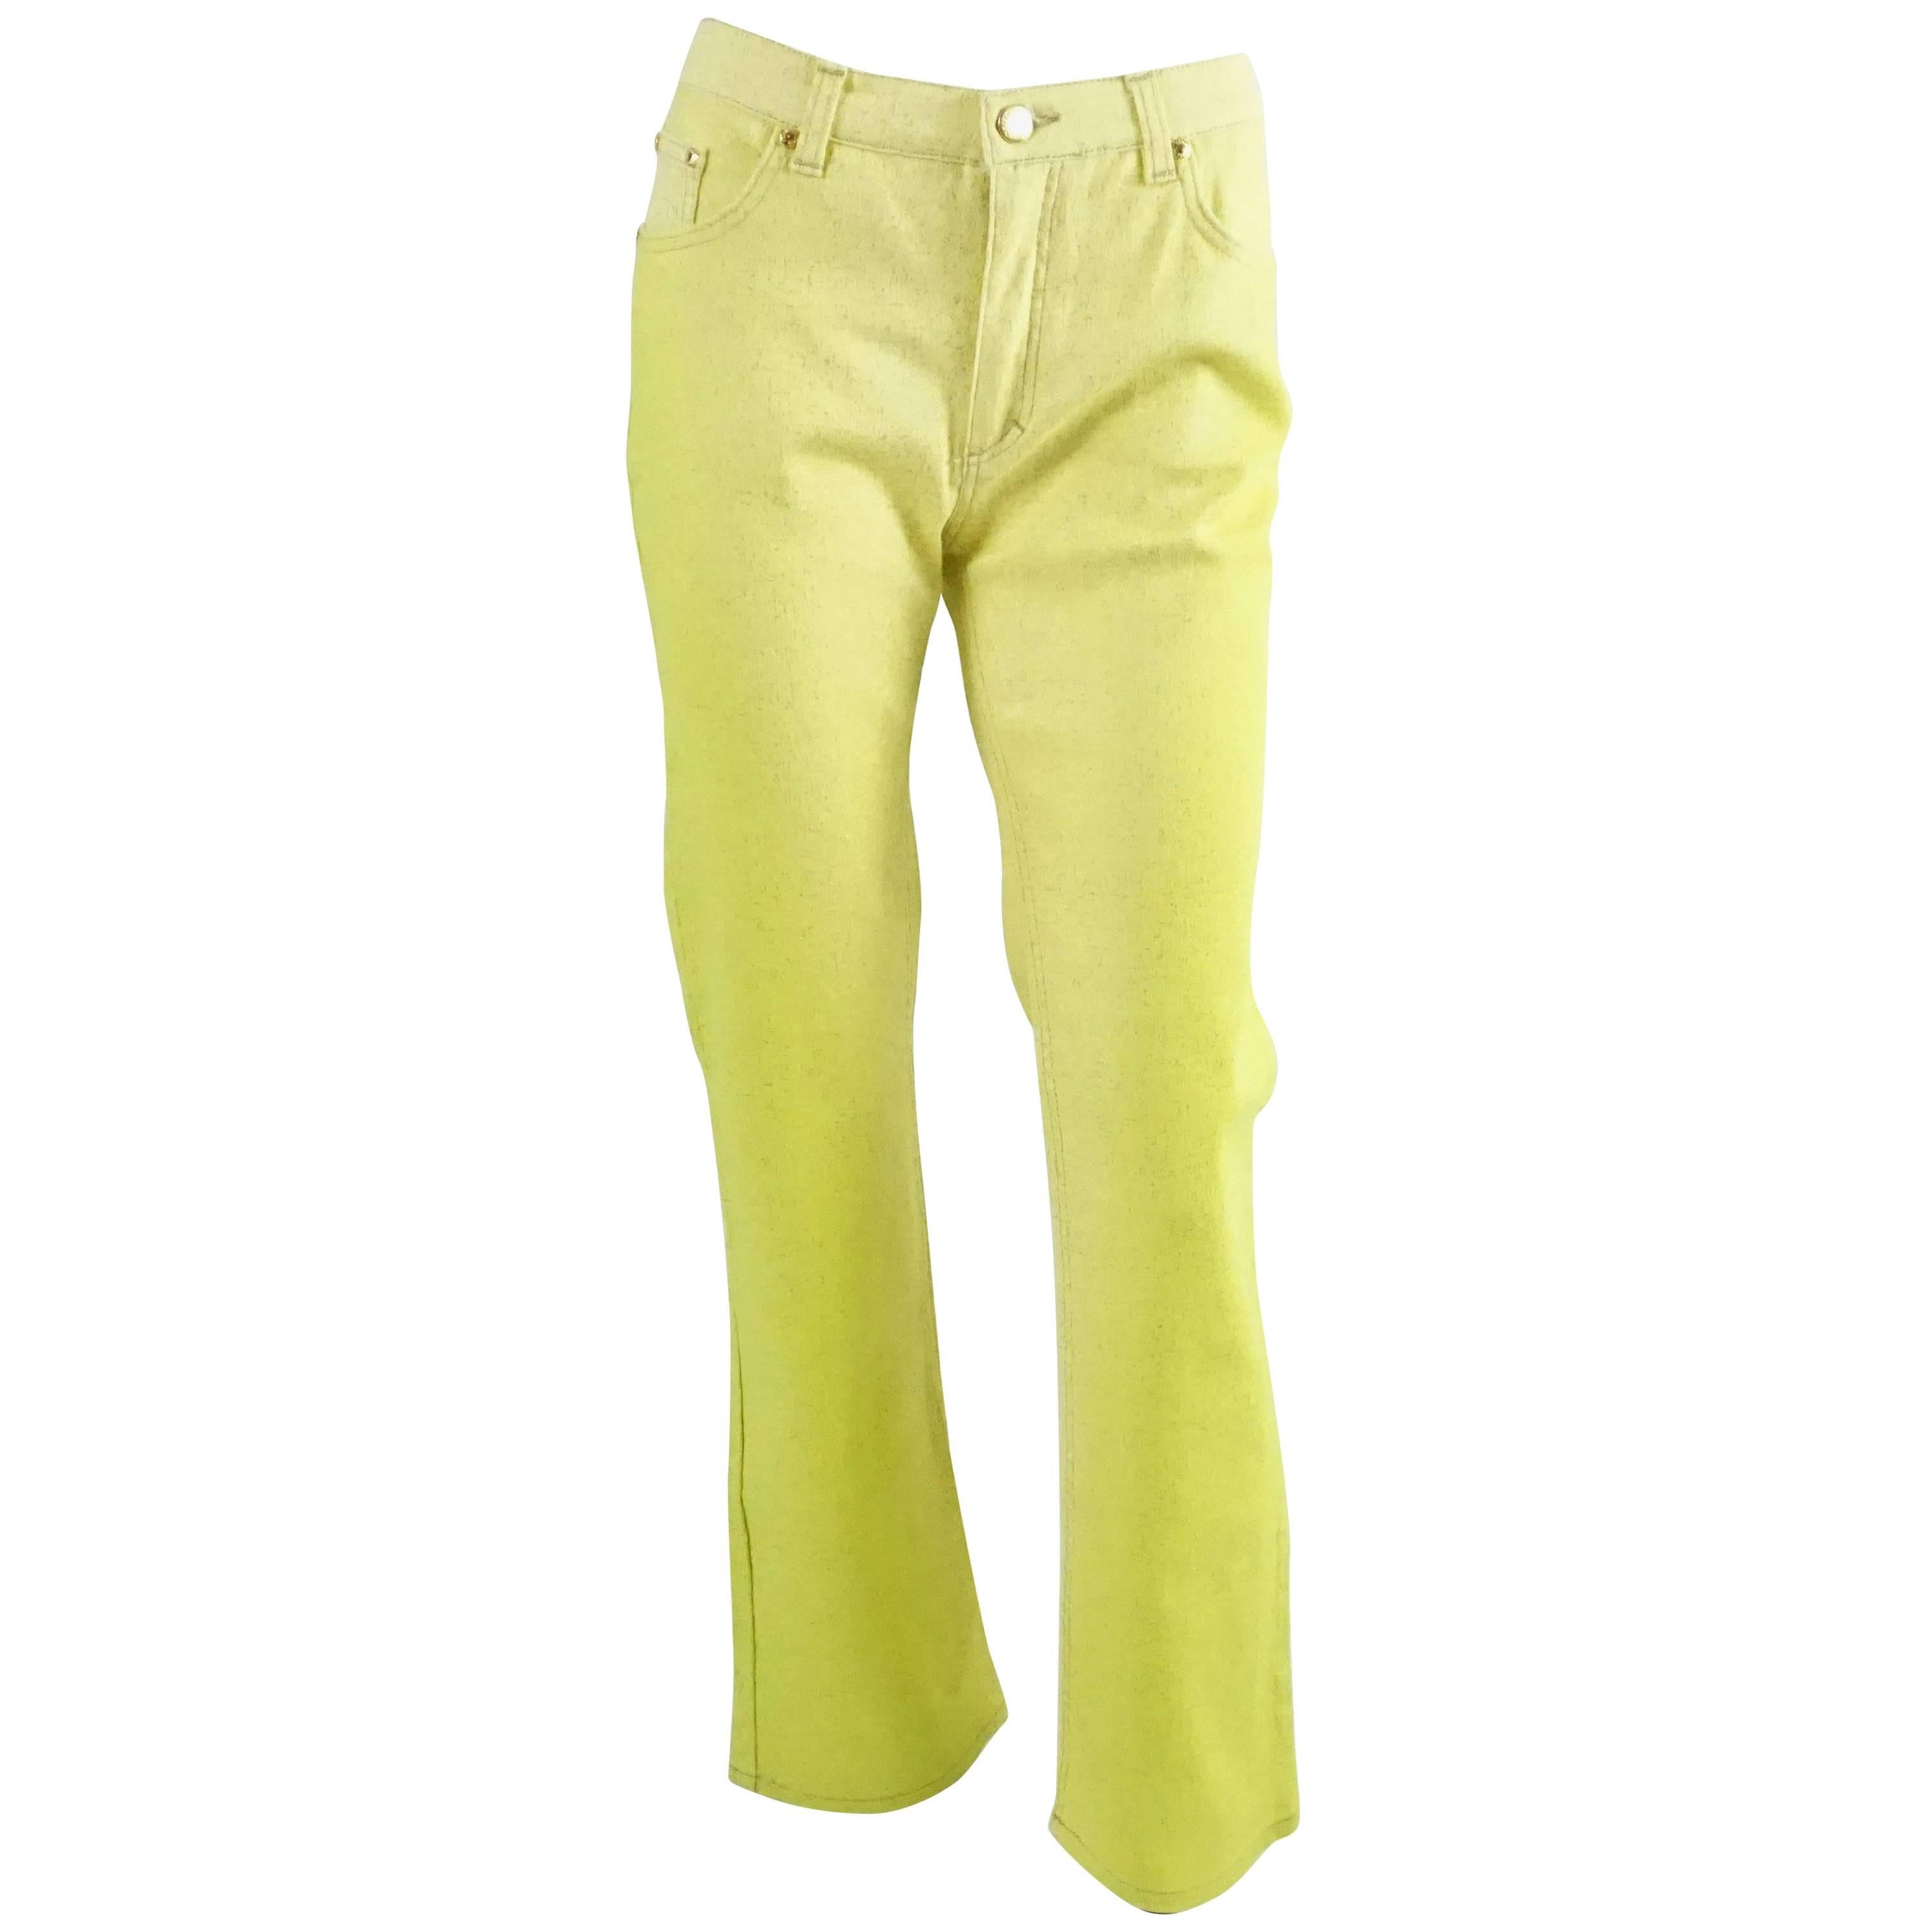 Roberto Cavalli 1990's High Waisted Yellow Glitter Boot cut Jeans - Size Medium For Sale